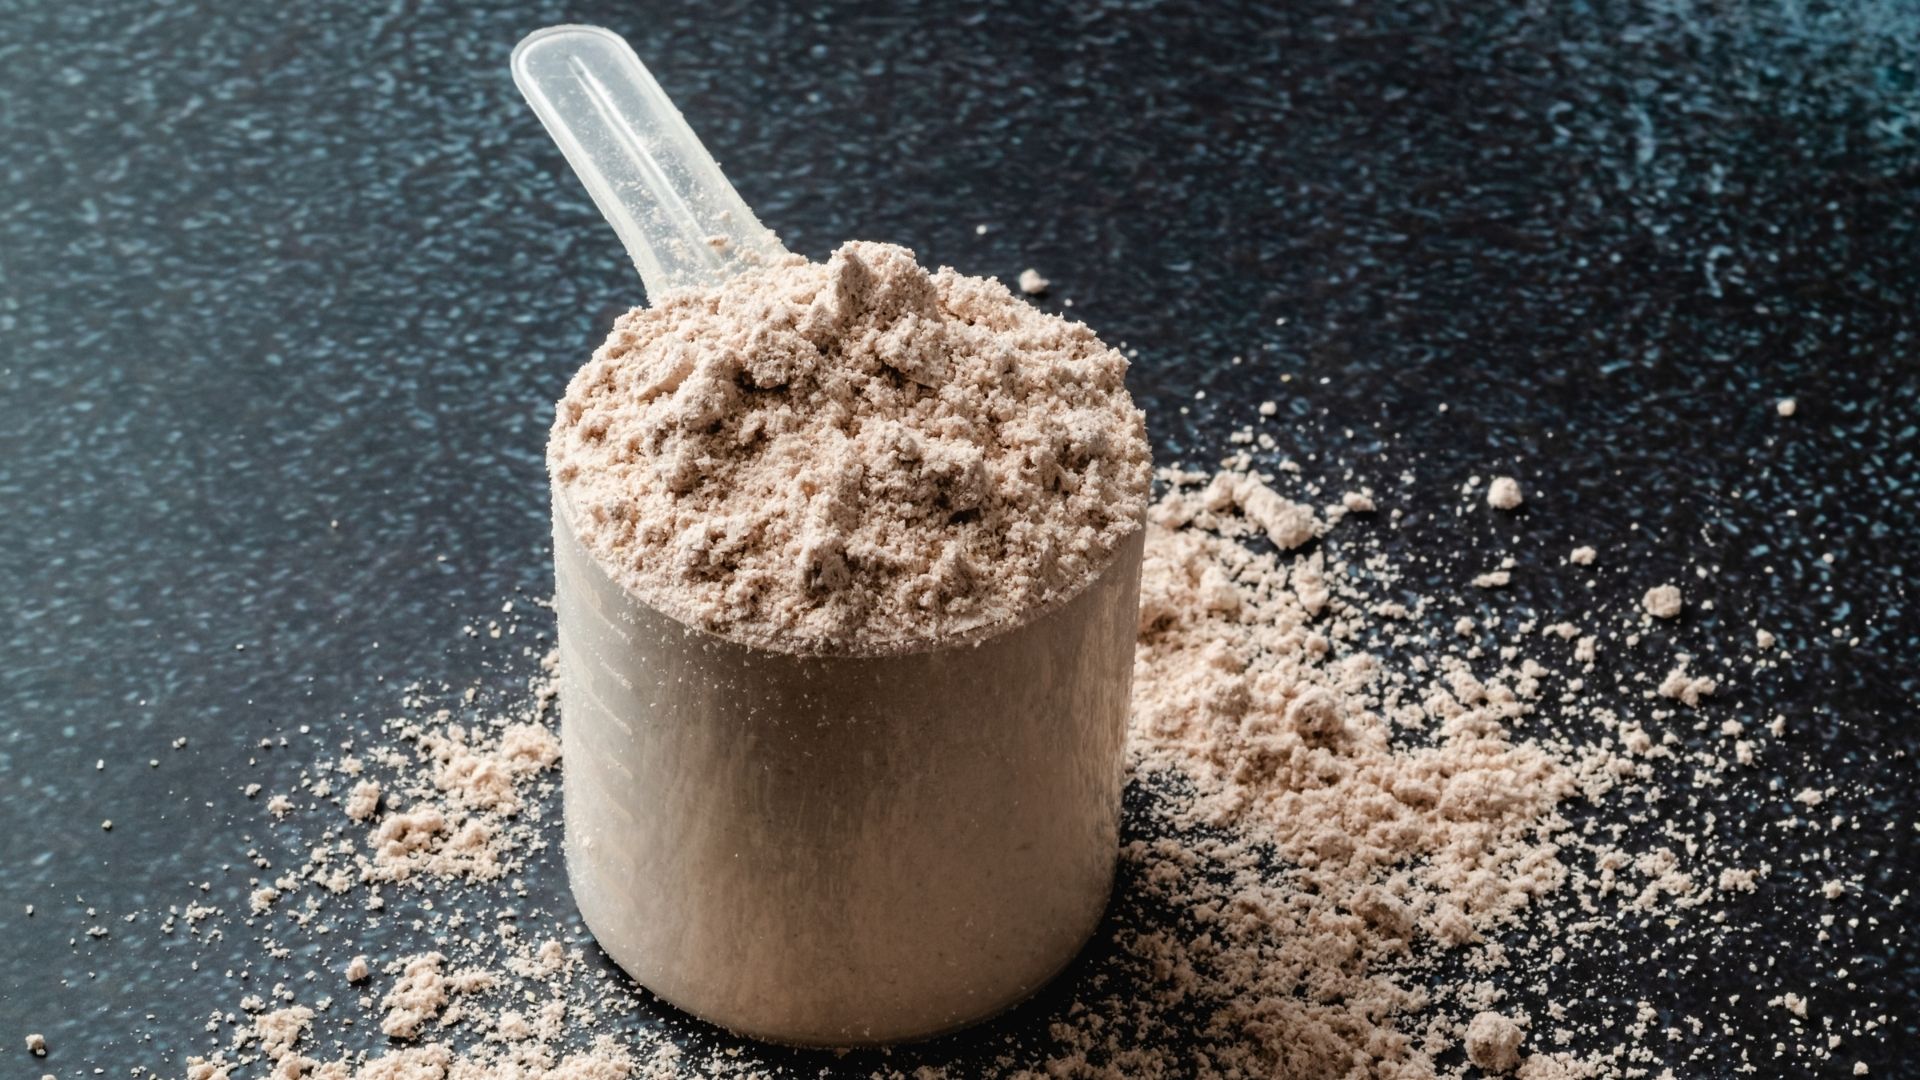 10 Popular Pre-Workout Supplement Ingredients and What They Do